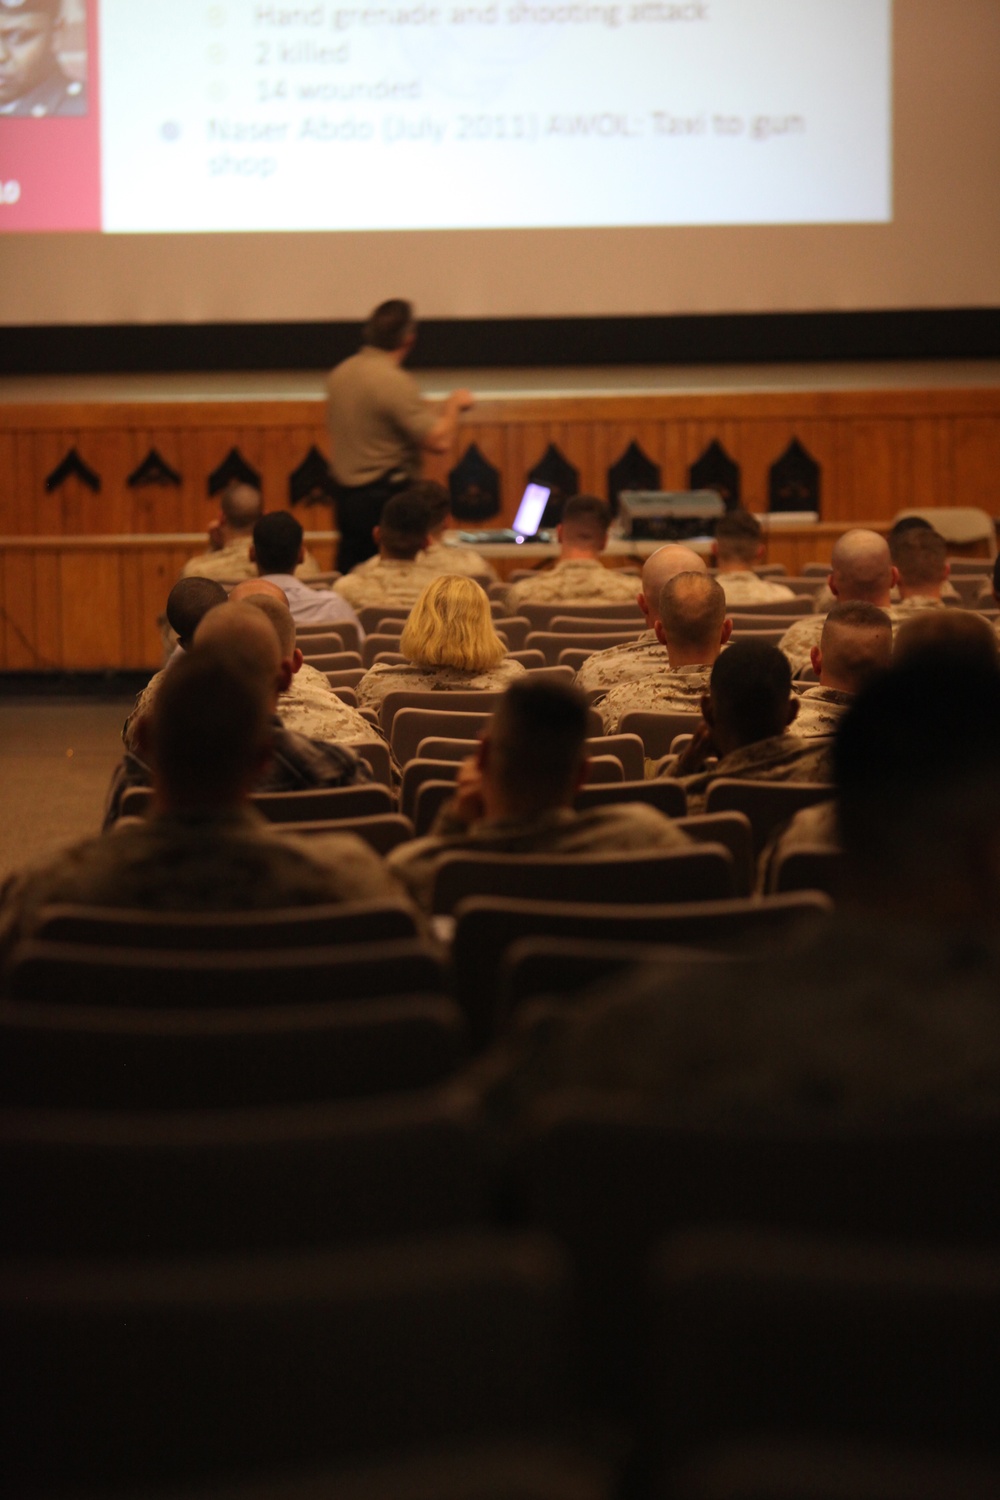 Communications Marines learn to fight workplace violence